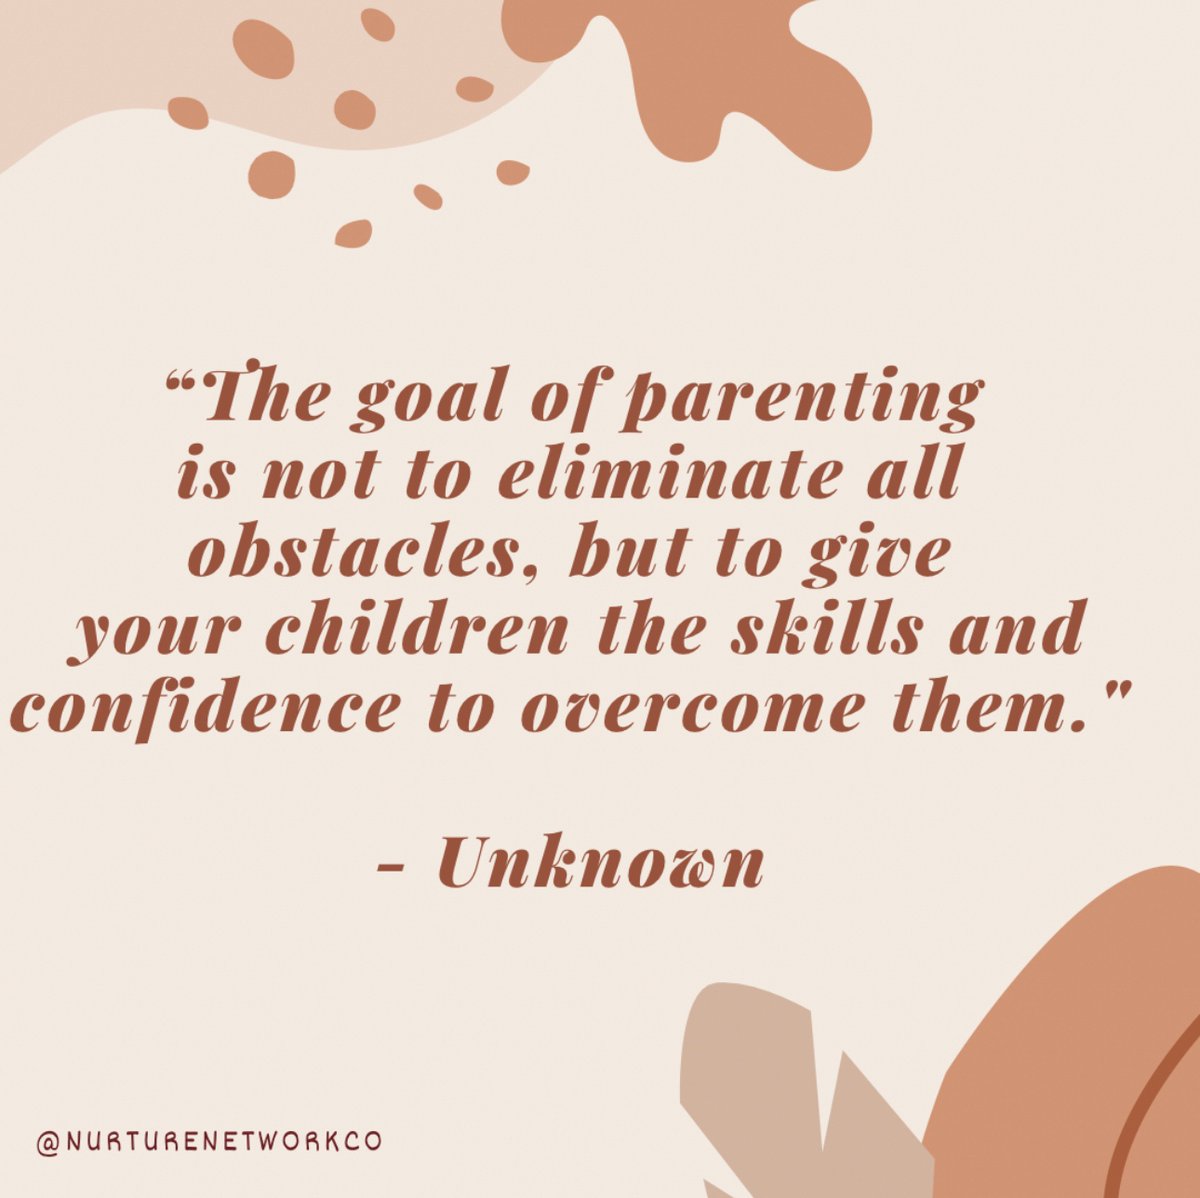 The Desire to Be Everything for Your Kids: Is It a Good Thing?

#ParentingTips #BalancedParenting #EmpoweringKids
#parenting #family #nurturenetworkco #parents #community #children #tips #advice #pregnancy #parentinglife #tipsforparenting #adviceforparenting #together #support